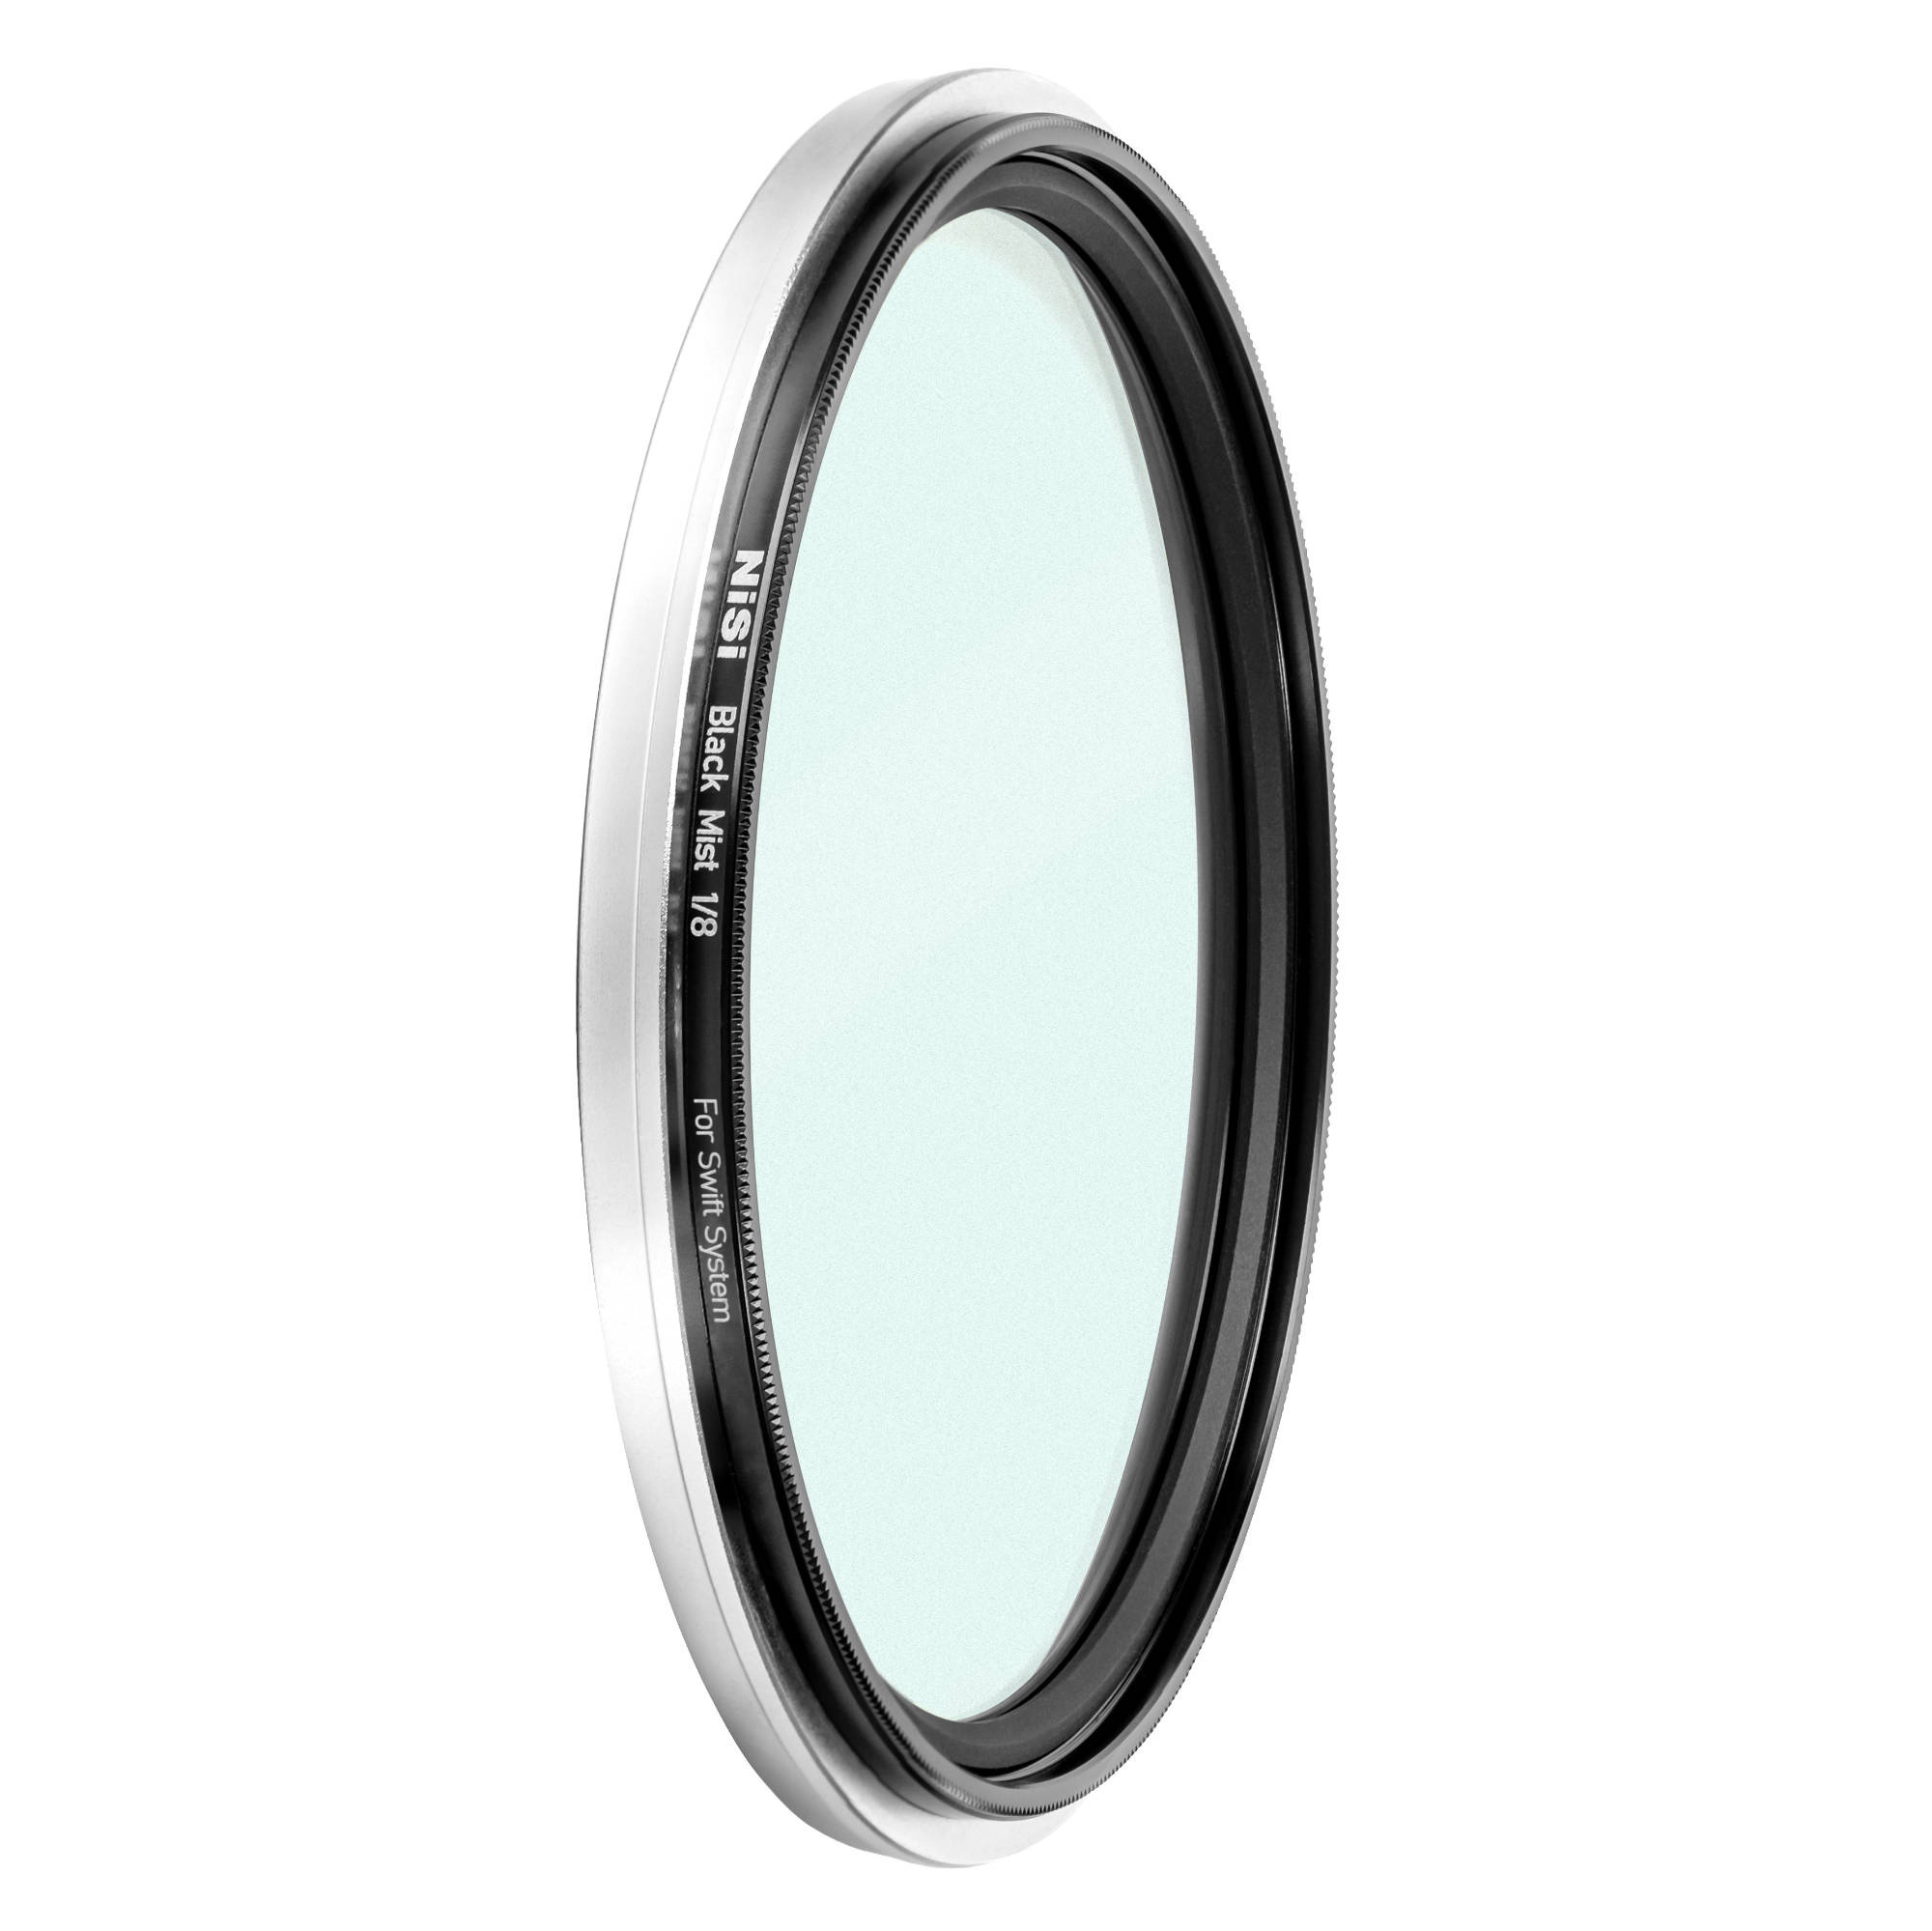 NiSi Black Mist 1/8 Filter for 72mm True Colour VND and Swift System